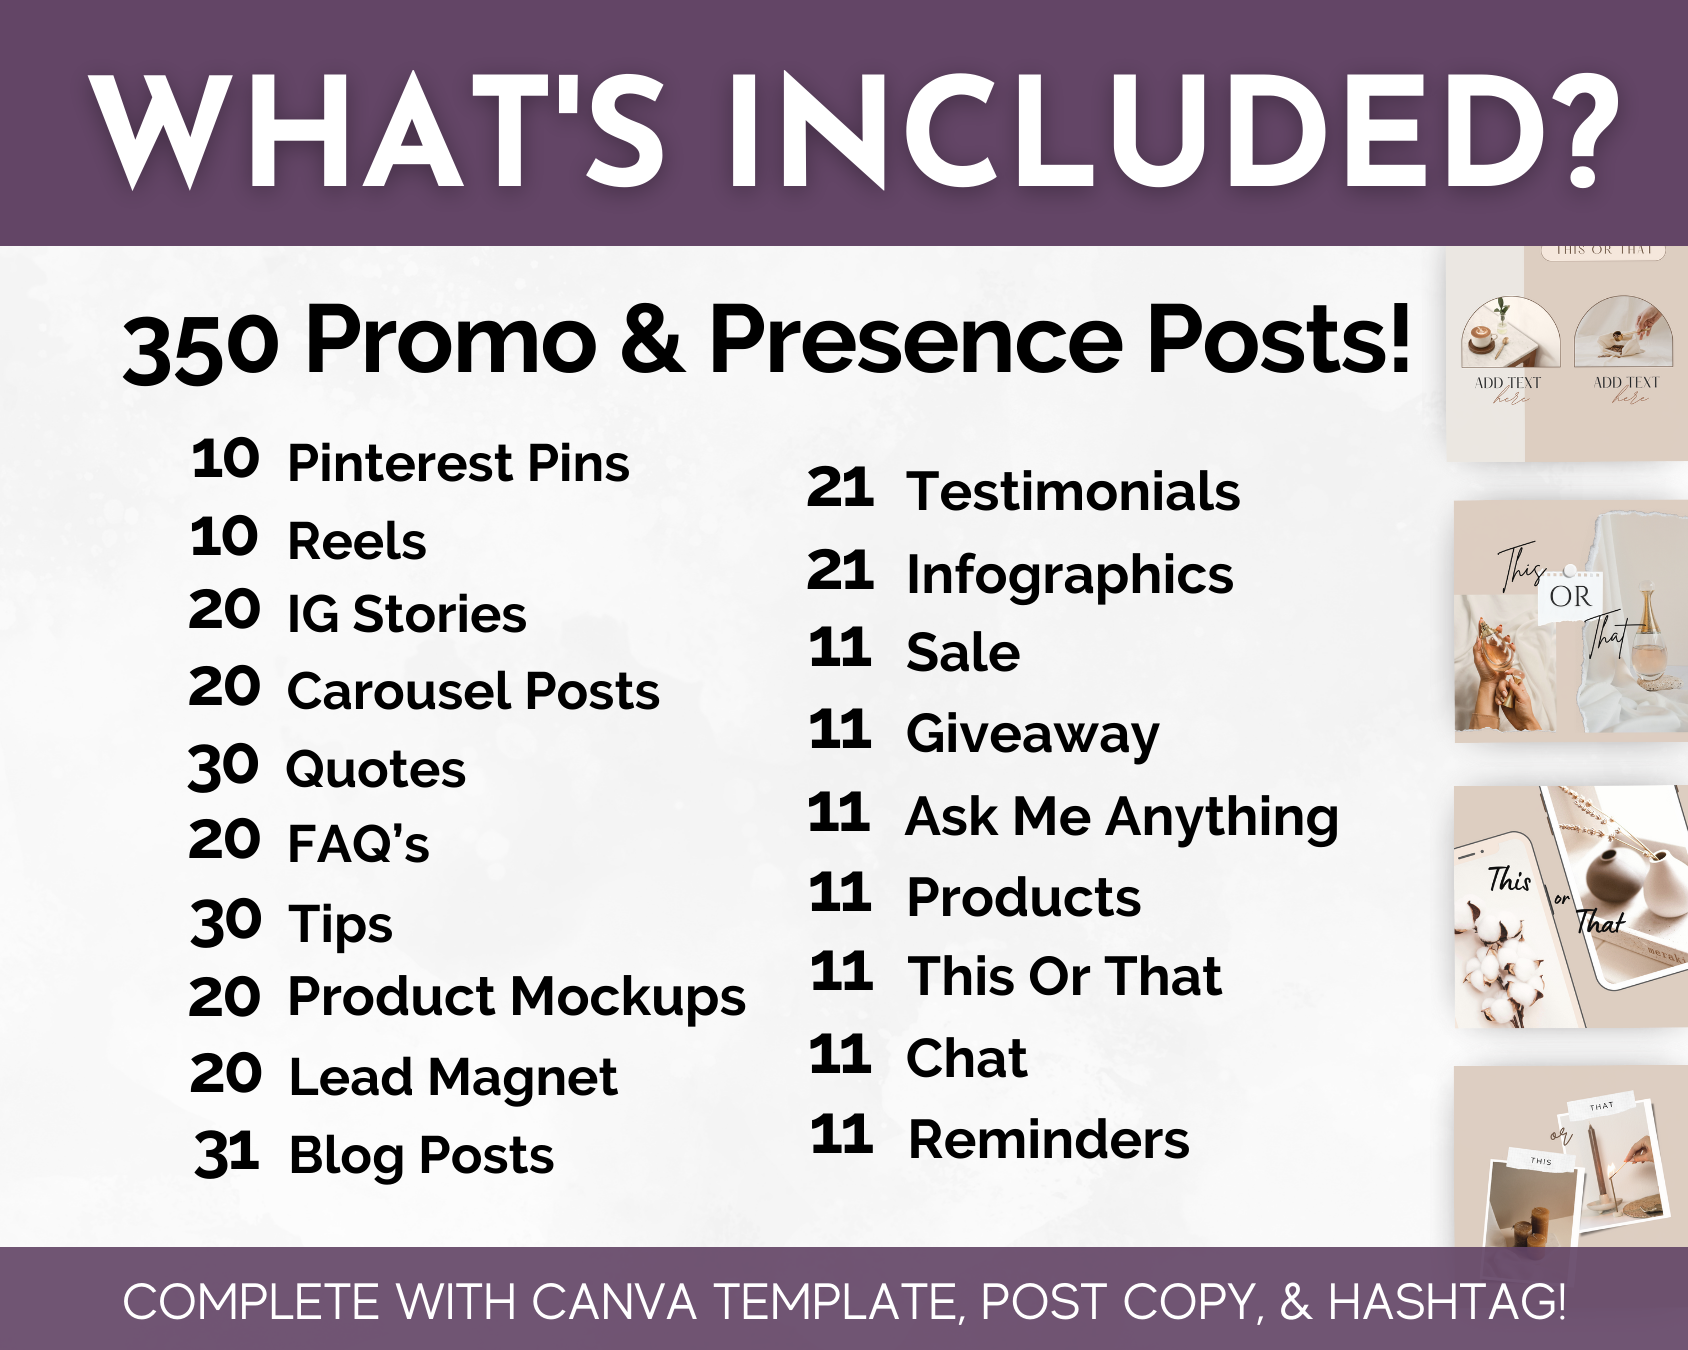 The Promo & Presence Social Media Post Bundle with Canva Templates by Socially Inclined includes content for social media images.